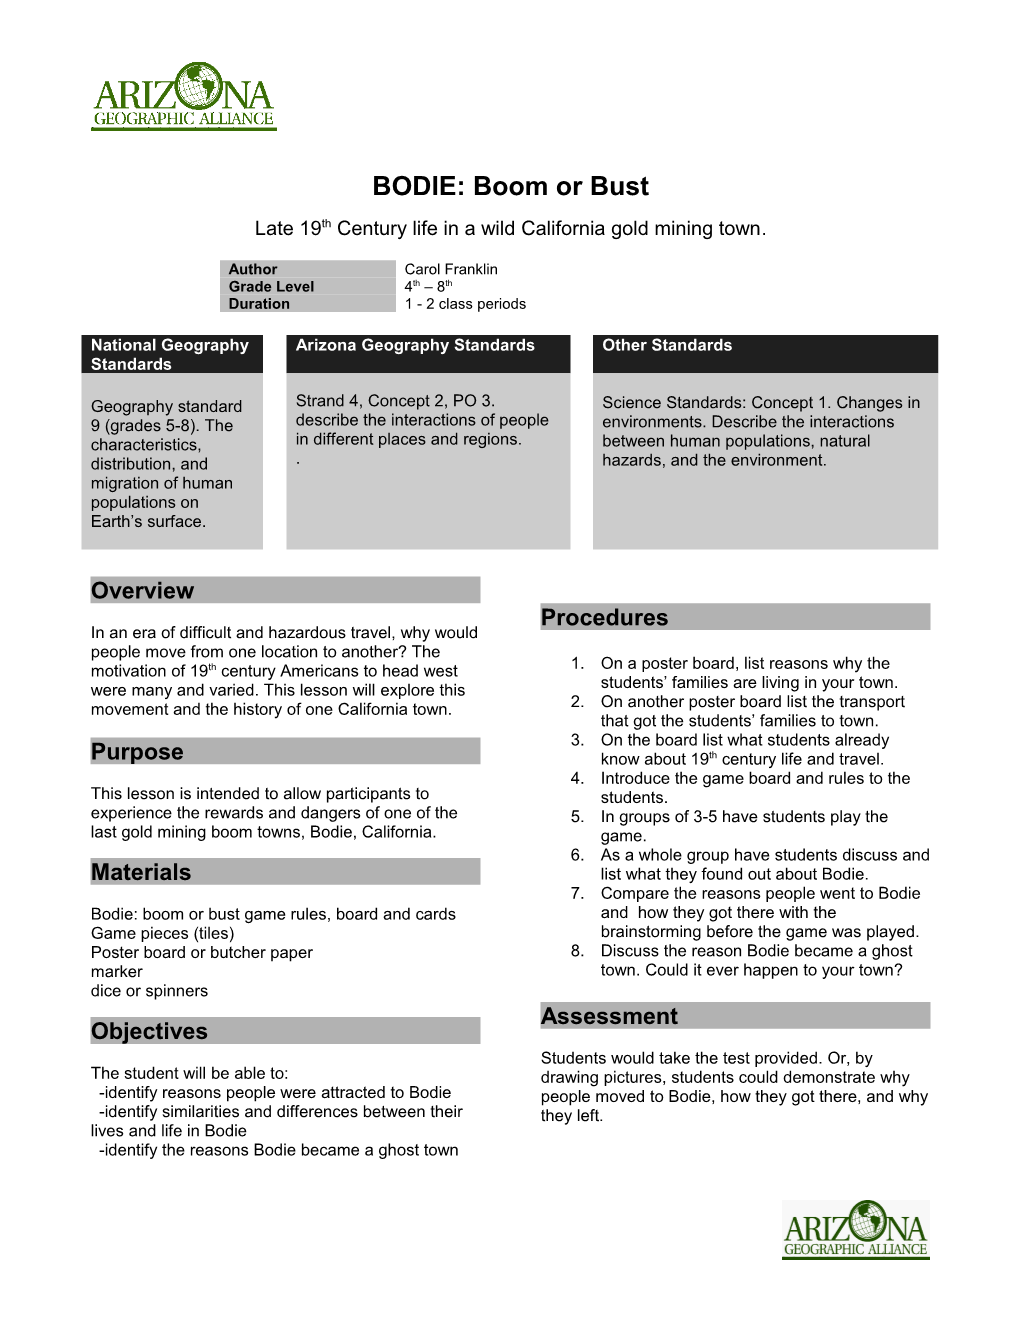 BODIE: Boom Or Bust